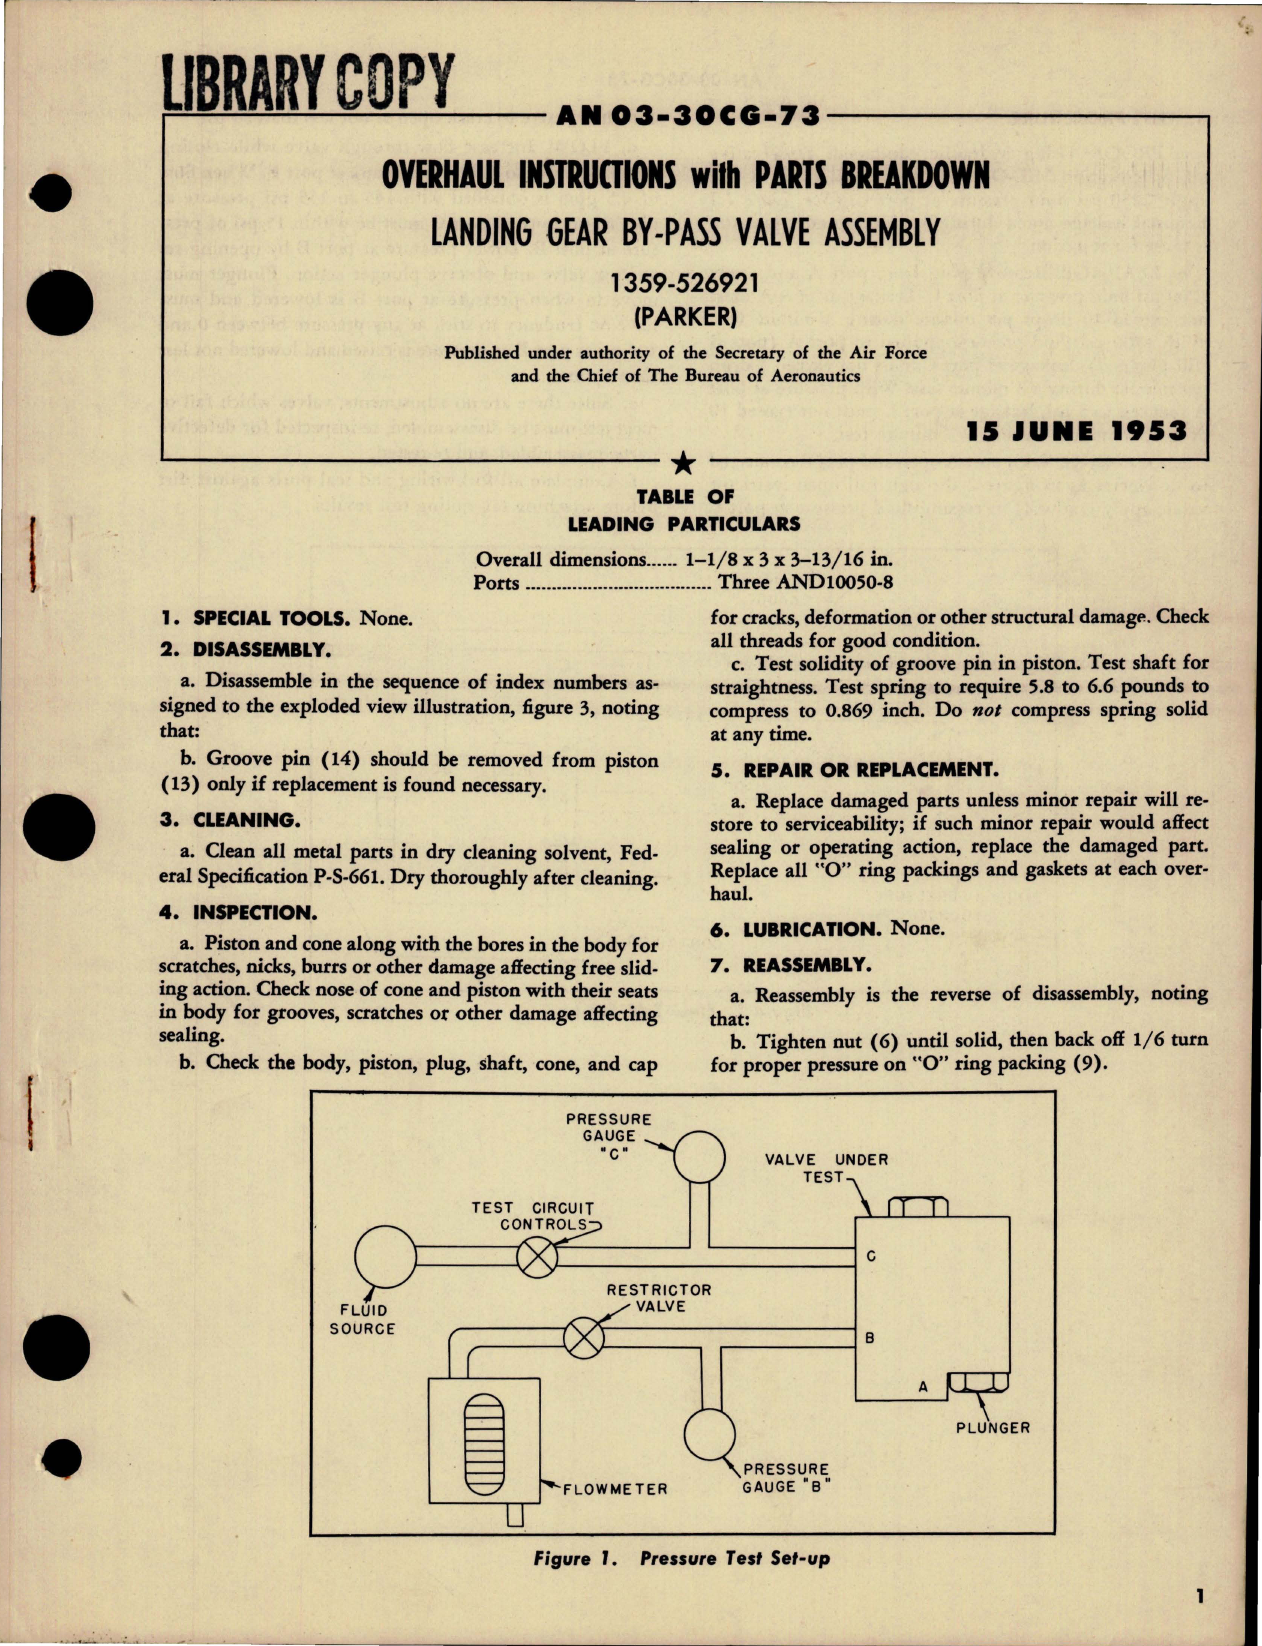 Sample page 1 from AirCorps Library document: Overhaul Instructions with Parts Breakdown for Landing Gear By-Pass Valve Assembly - 1359-526921